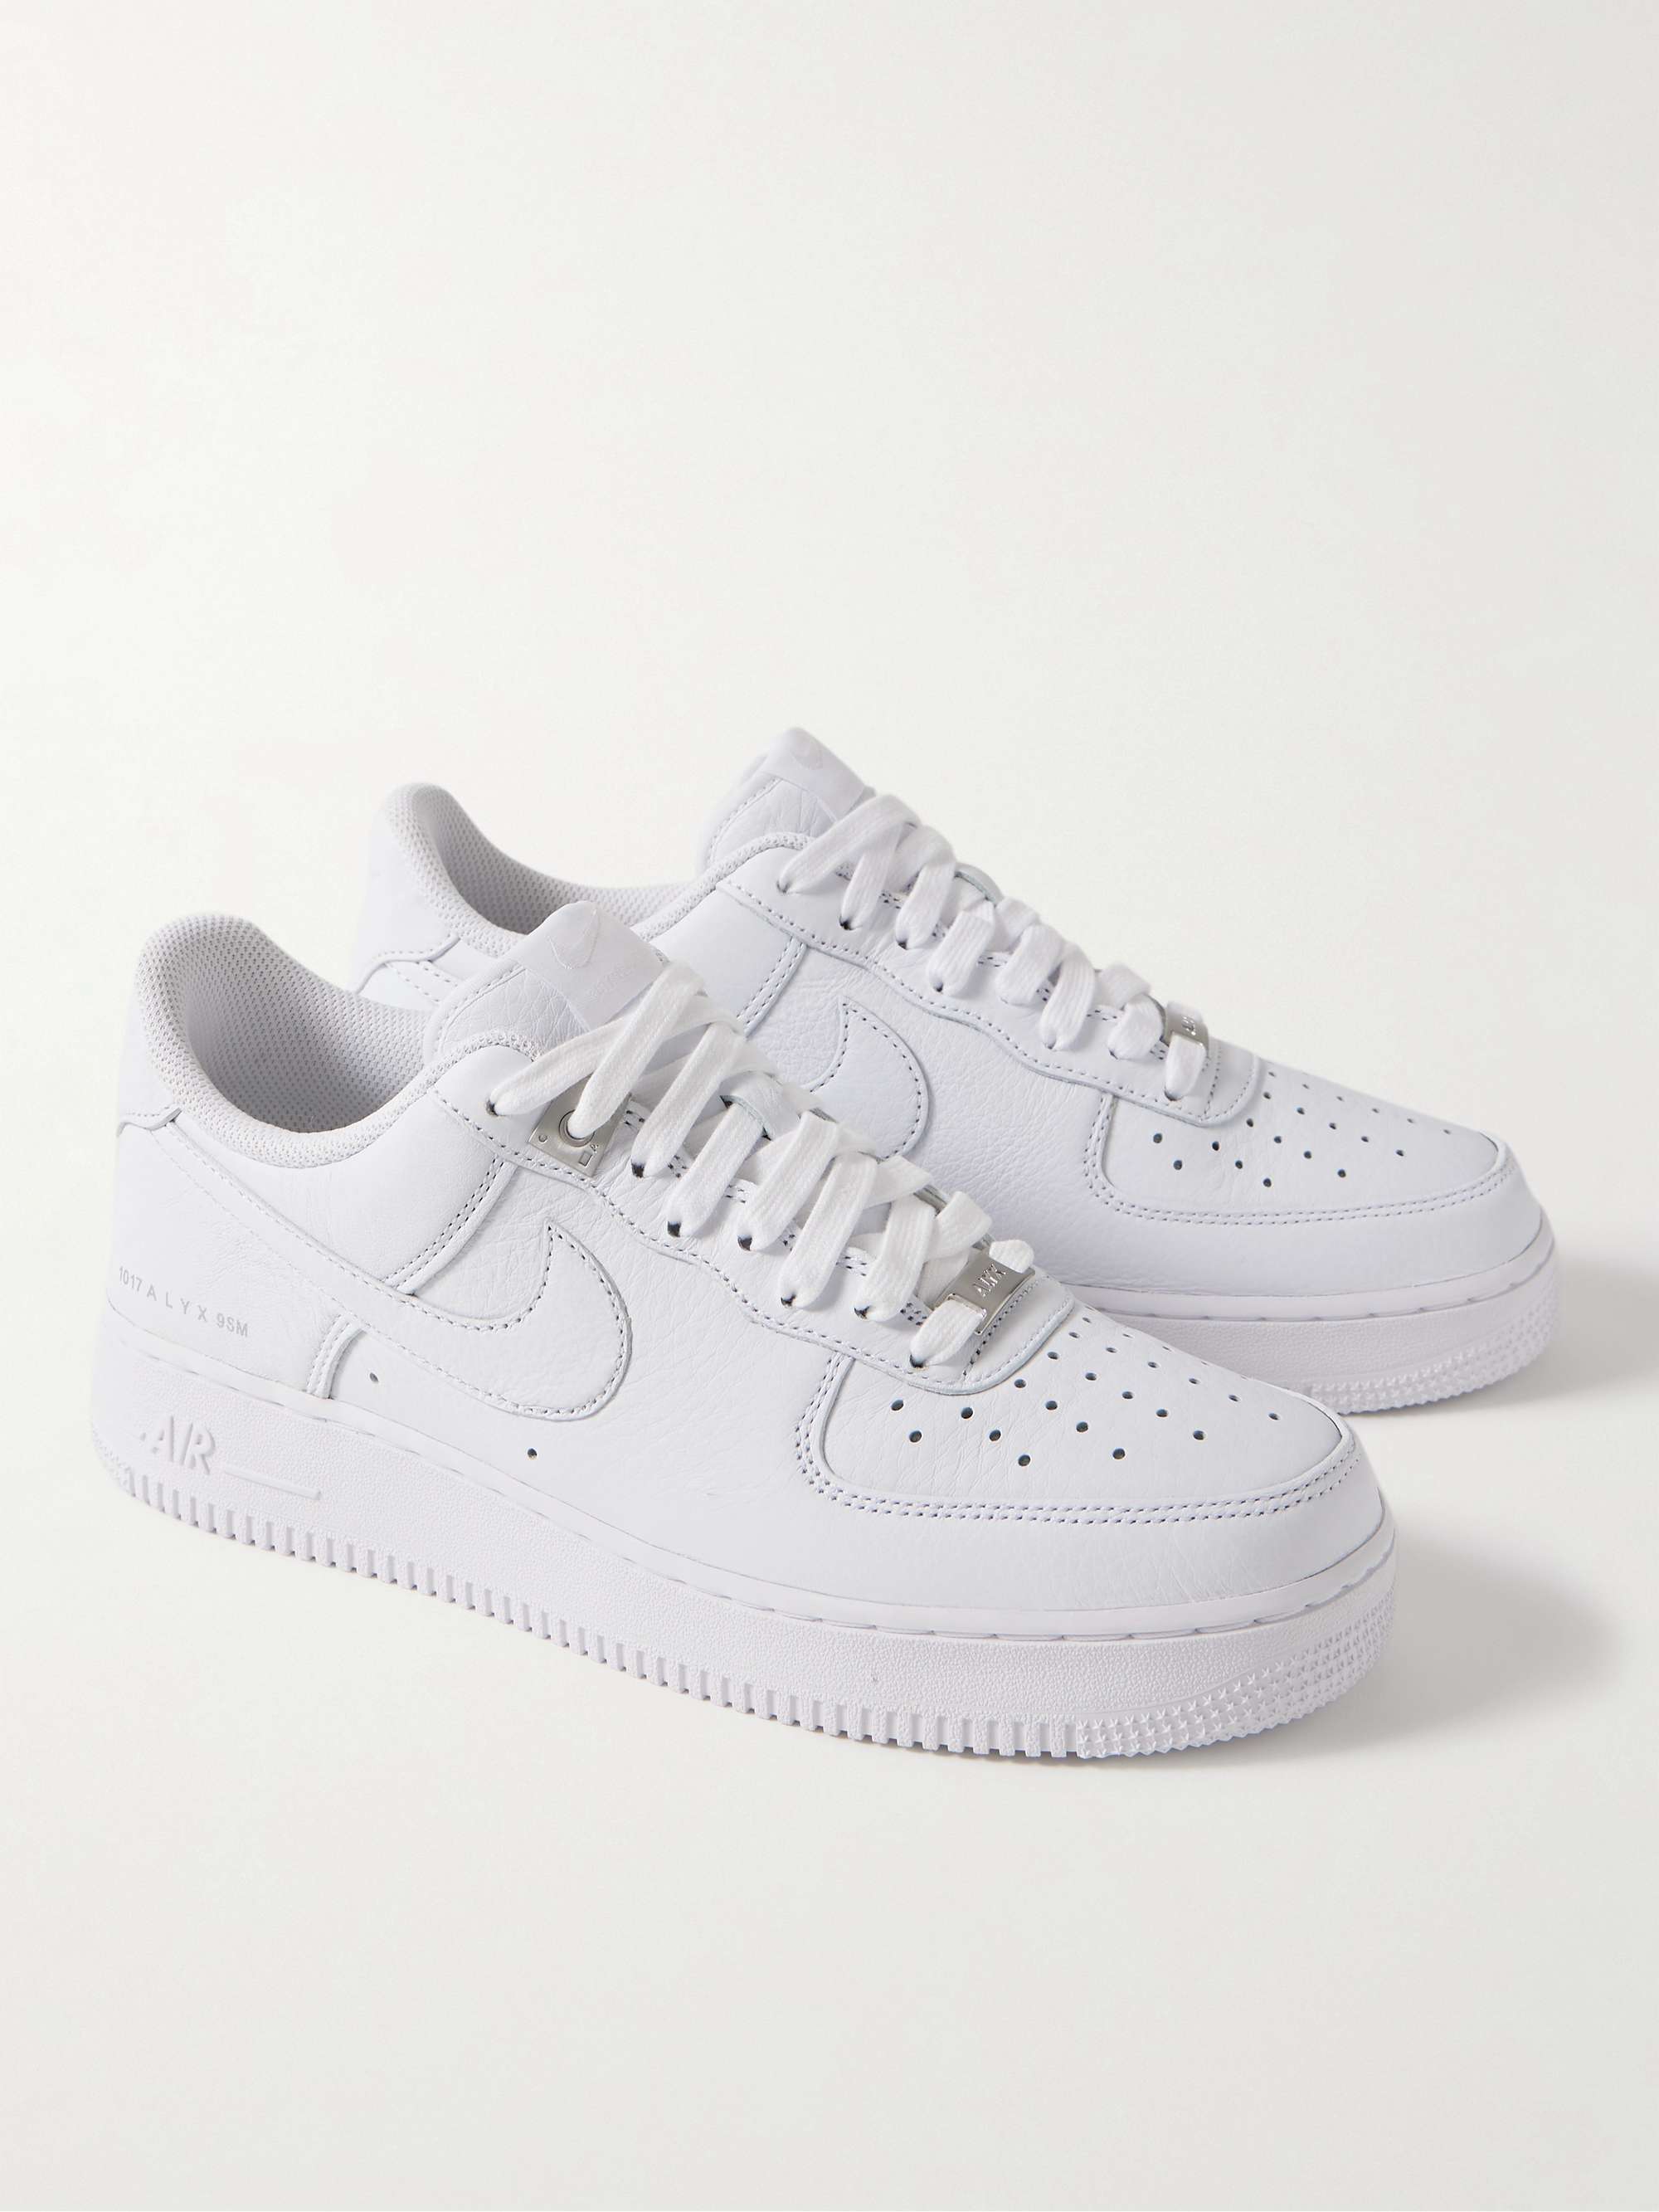 NIKE + 1017 ALYX 9SM Air Force 1 SP Leather Sneakers for Men | MR PORTER